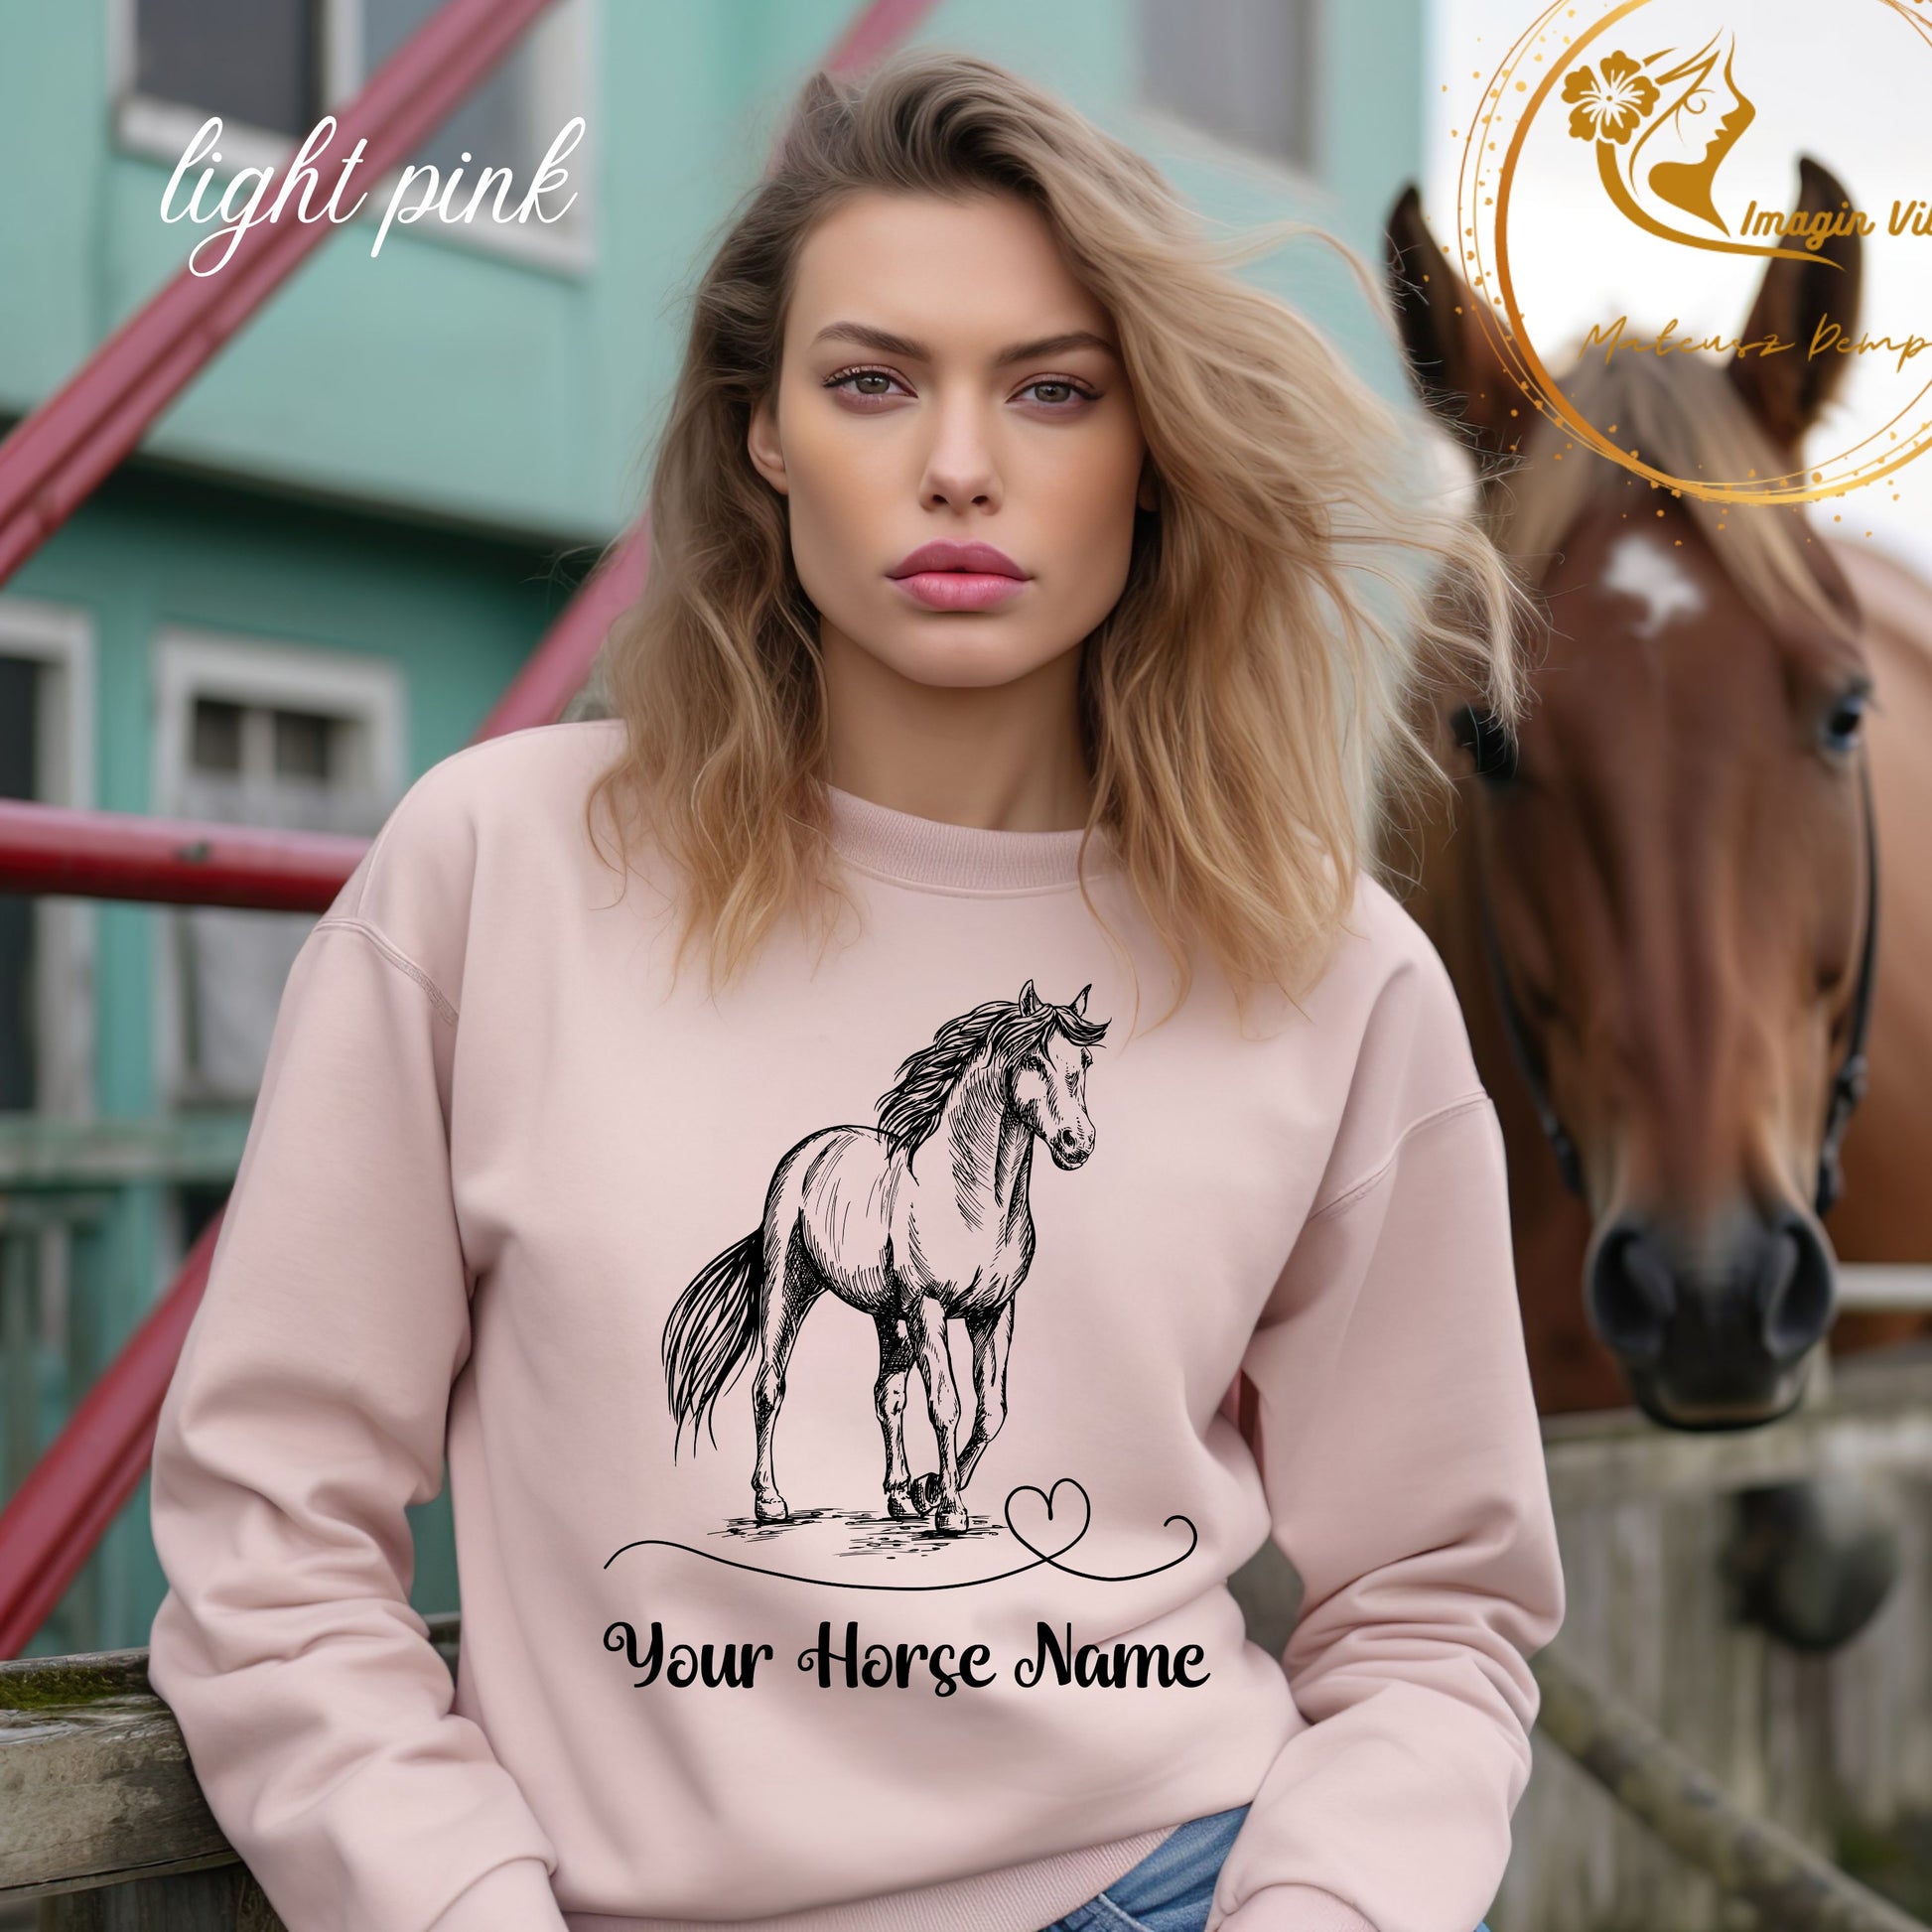 Personalized Horse Sweatshirt - Gift for Horse Owner, Perfect for Christmas, Birthdays, and Equestrian Enthusiasts Sweatshirt   